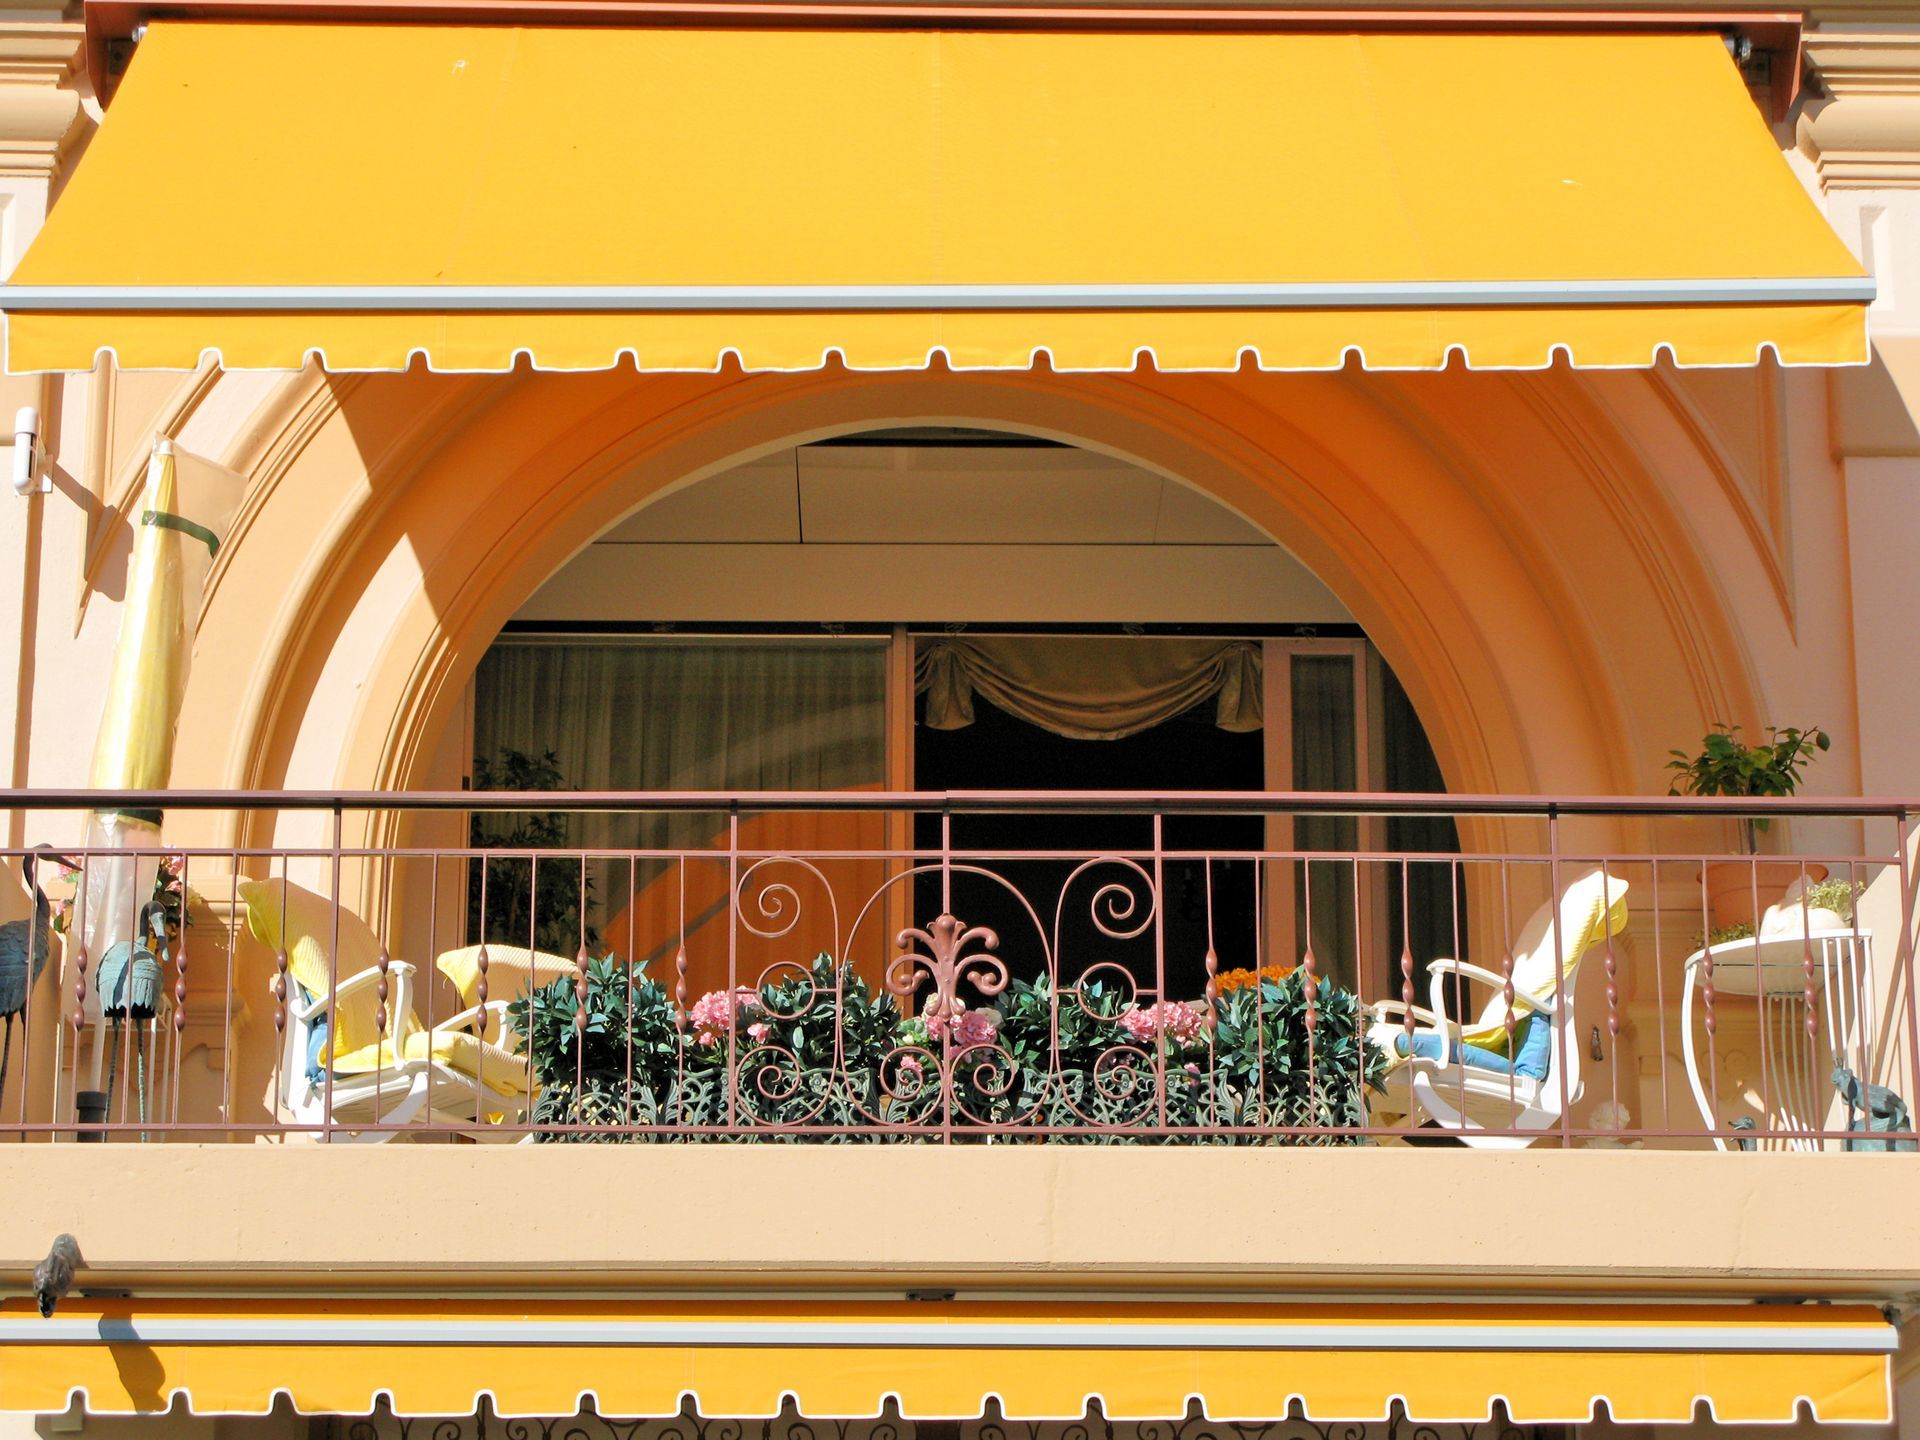 The Colour Of Awning Affect Your Business